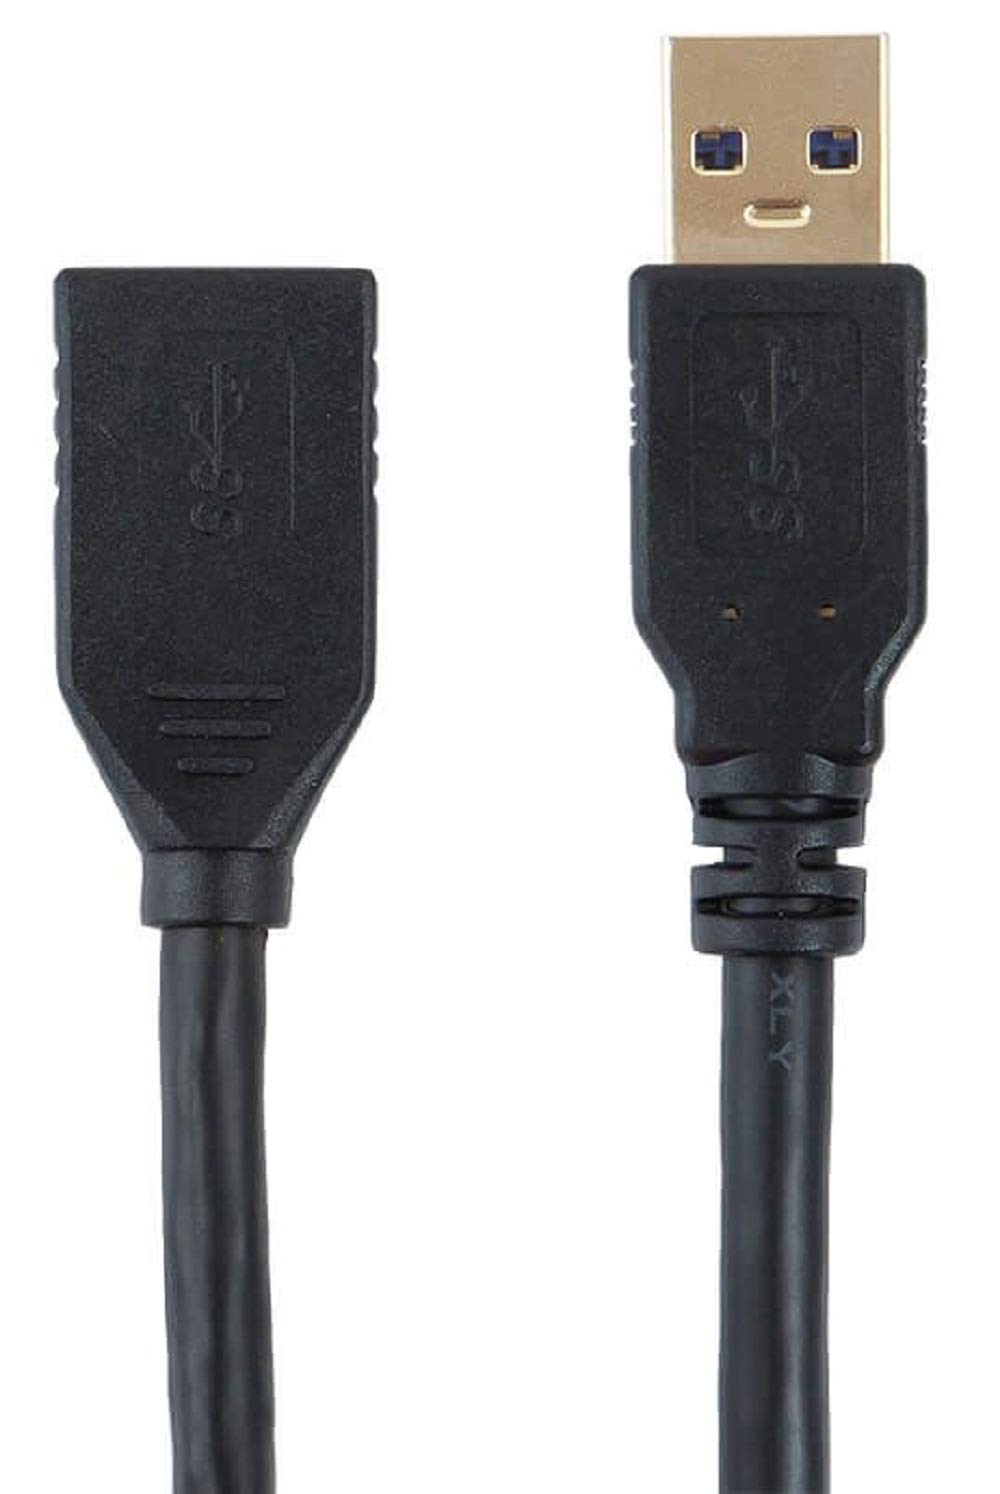  [AUSTRALIA] - Monoprice Select Series USB 3.0 A to A Female Extension Cable 6ft use with Playstation, Xbox, Oculus VR, USB Flash Drive, Card Reader, Hard Drive, Keyboard, Printer, Camera and More! 6 Feet